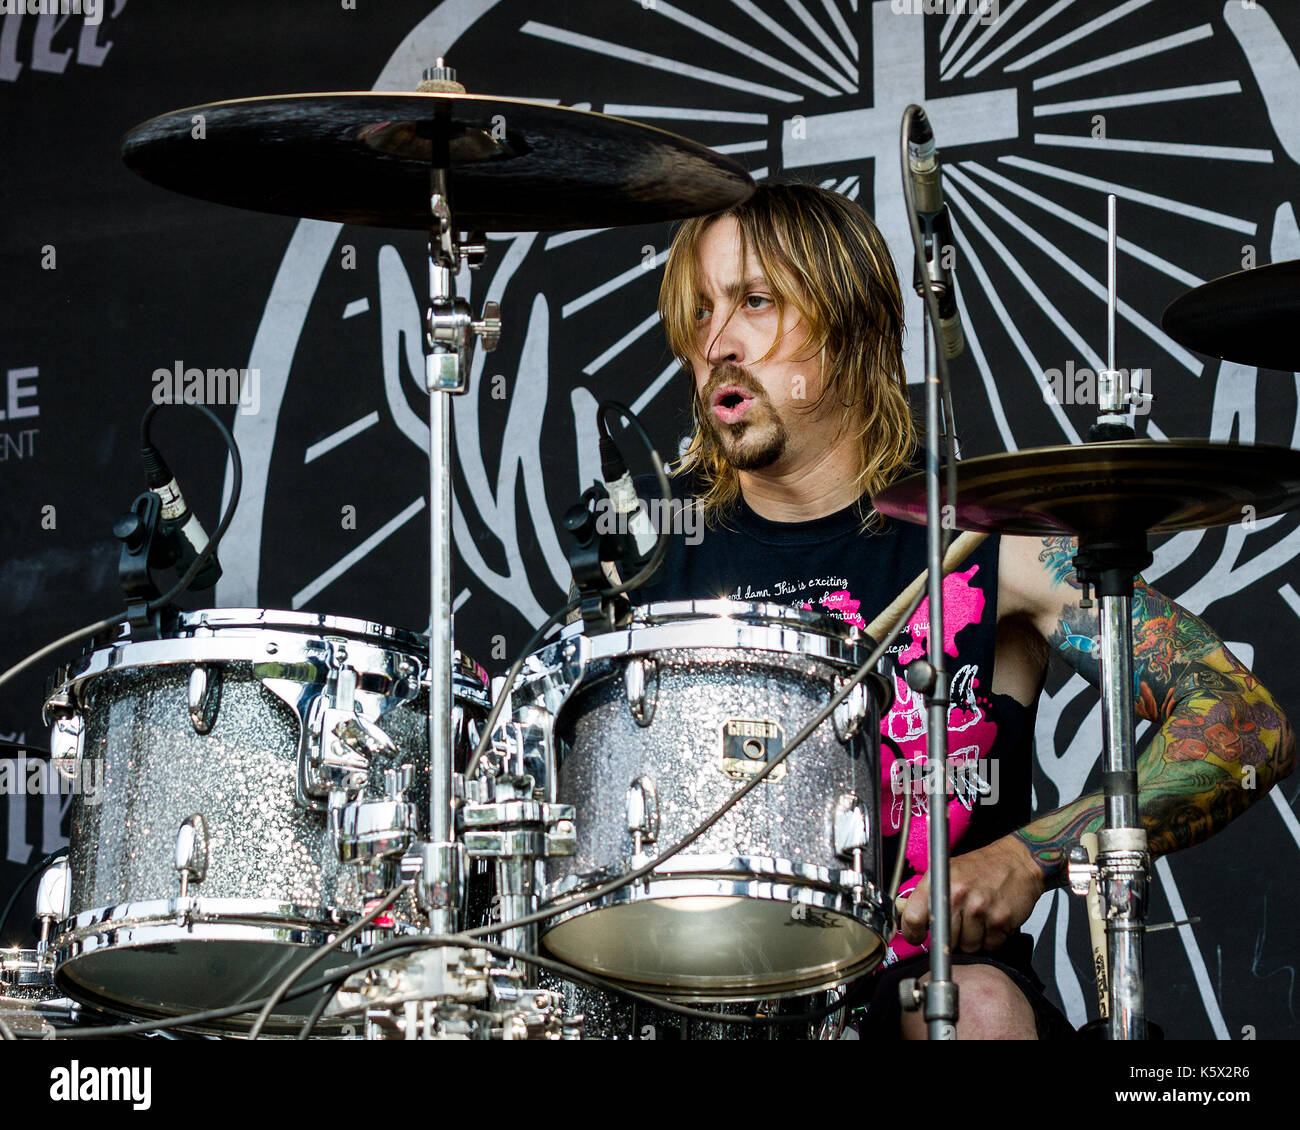 NAMPA, IDAHO - SEPTEMBER 25: Brian Dugan the drummer of candlelight red  fame pounding out the drums at the Rockstar Uproar Festival on September 25  20 Stock Photo - Alamy